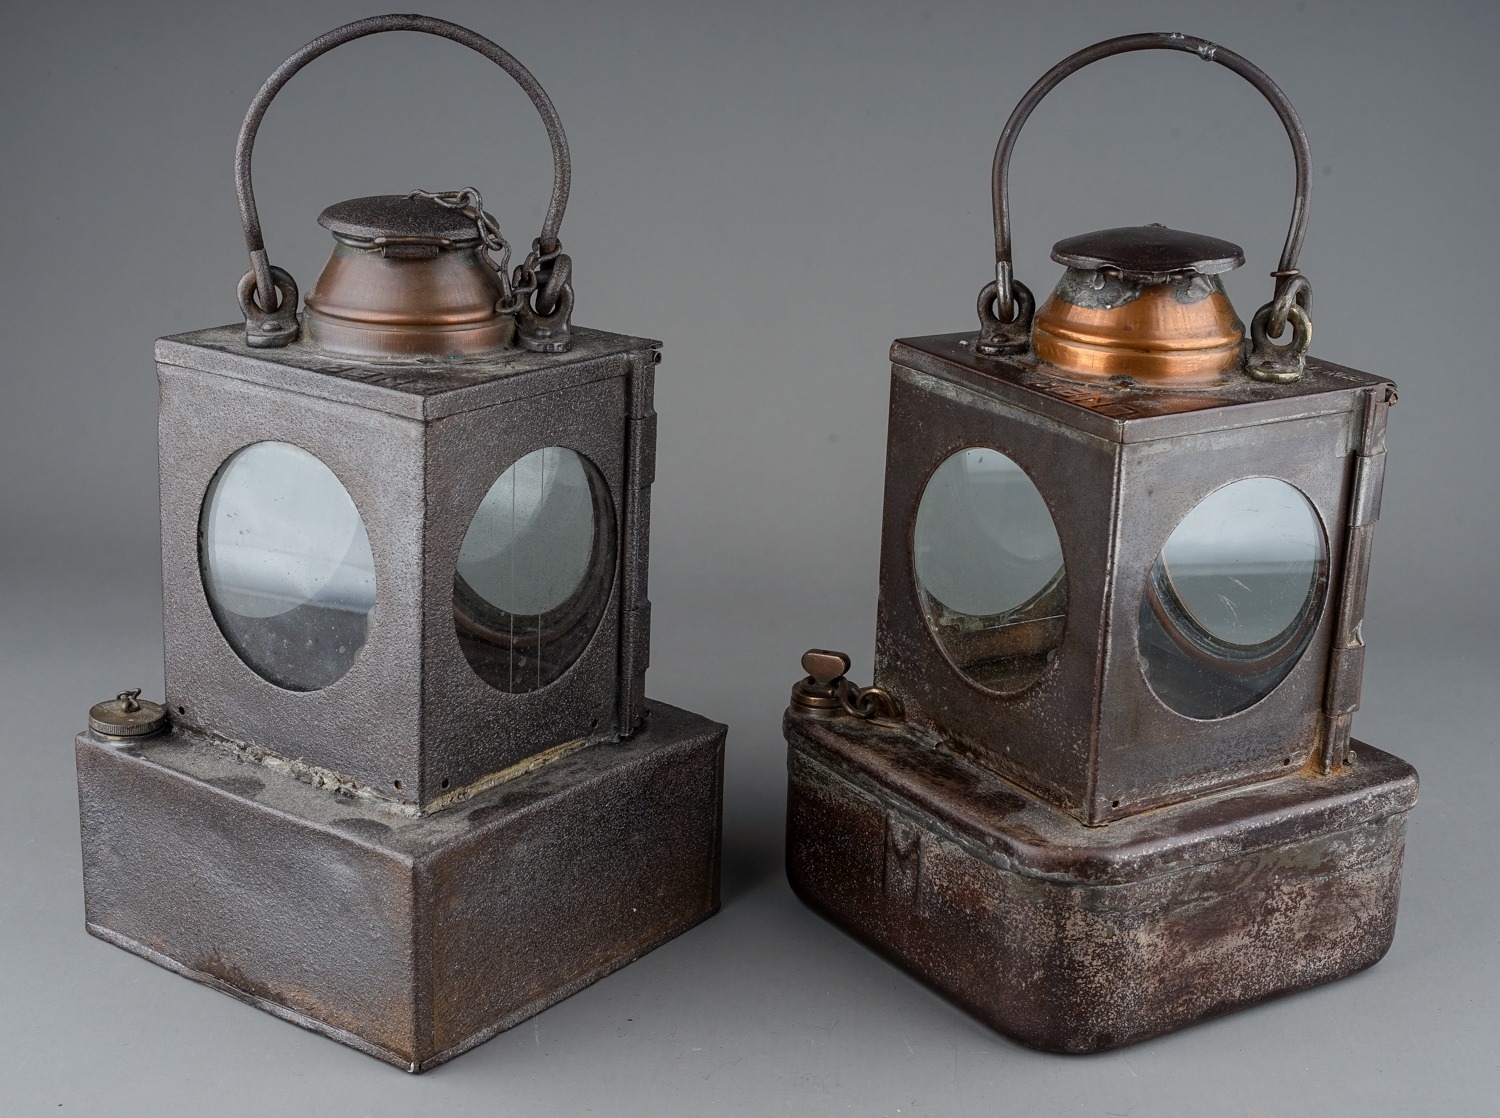 Two British Rail LNER (Eastern) Welch Patent railway lamps, Reg No 711205, approx 23cm high (2)